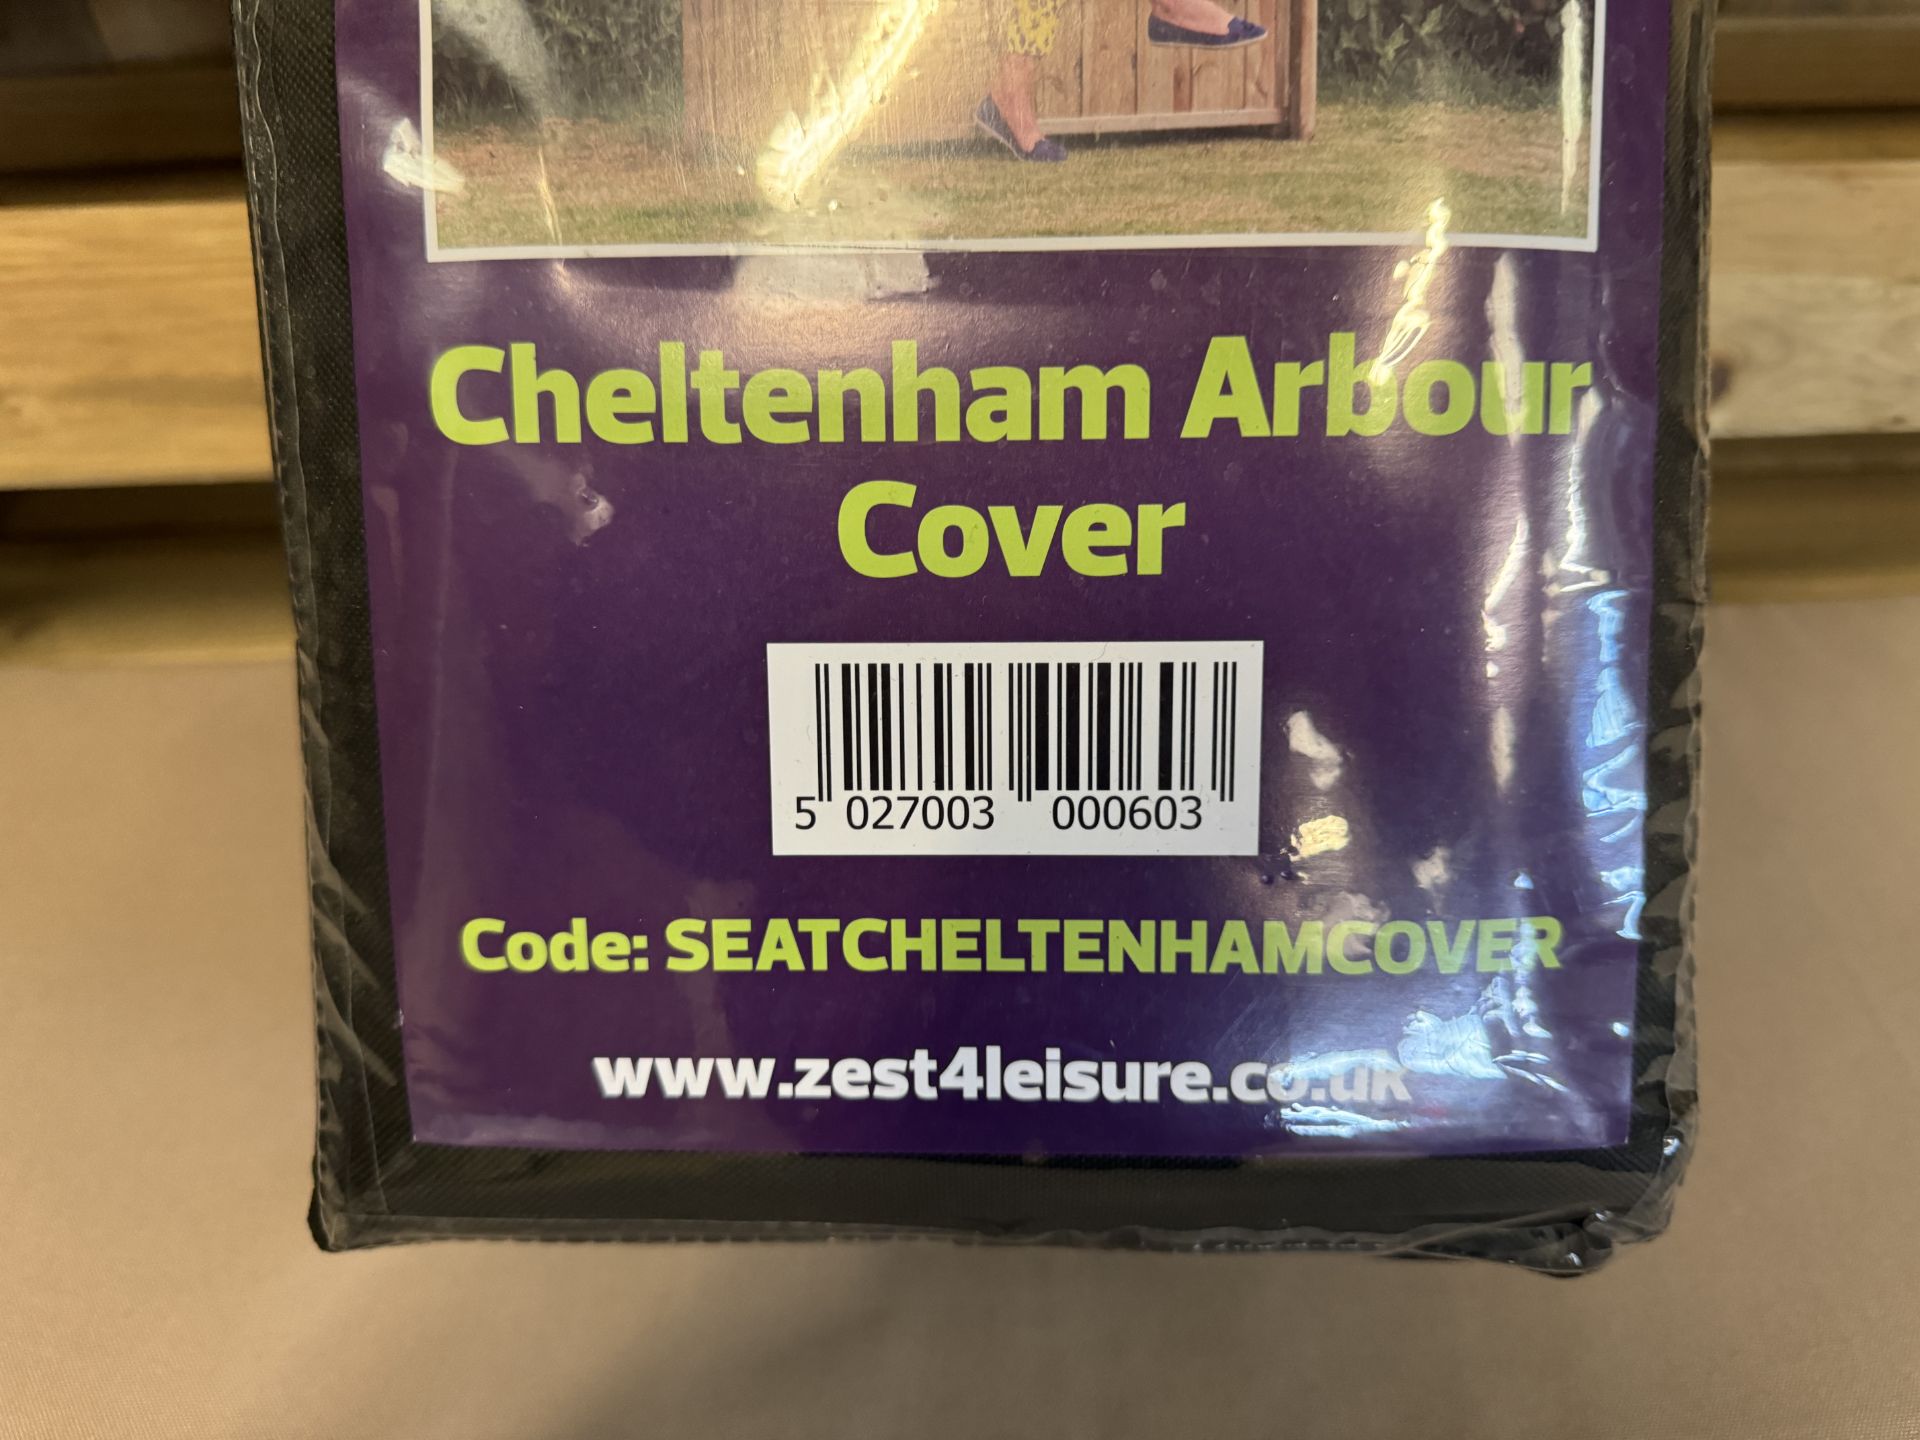 Cheltenham Arbour Cover - New as Packaged - Image 2 of 2